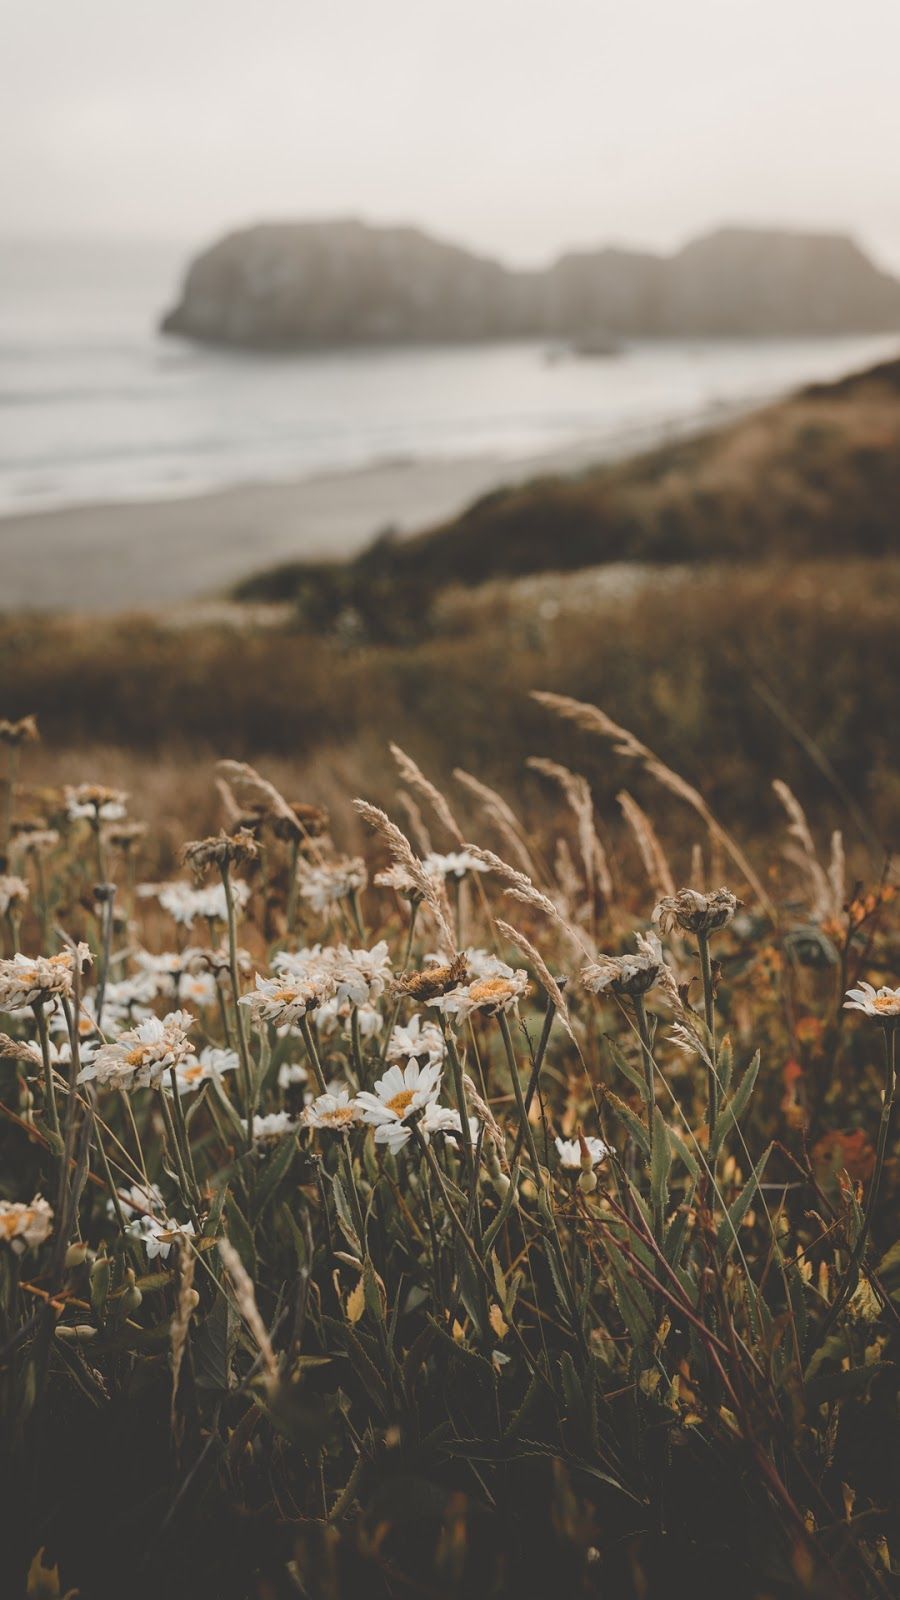 A field of wildflowers overlooking the ocean - Nature